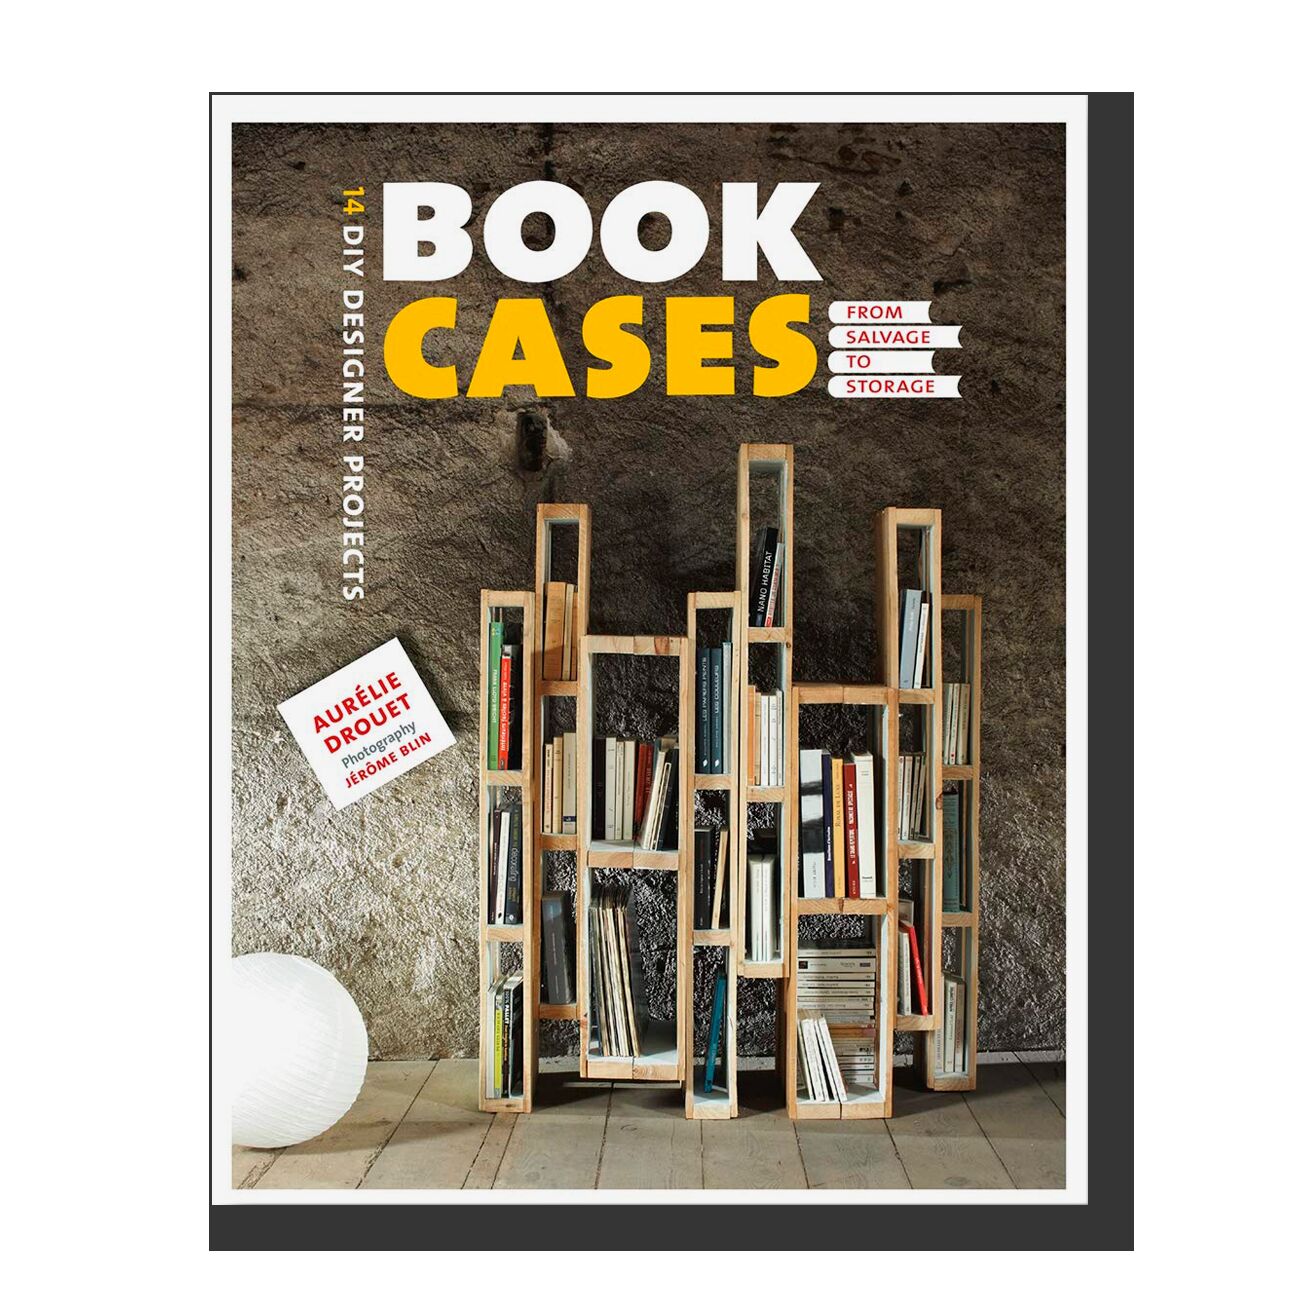 Bookcases: From Salvage to Storage